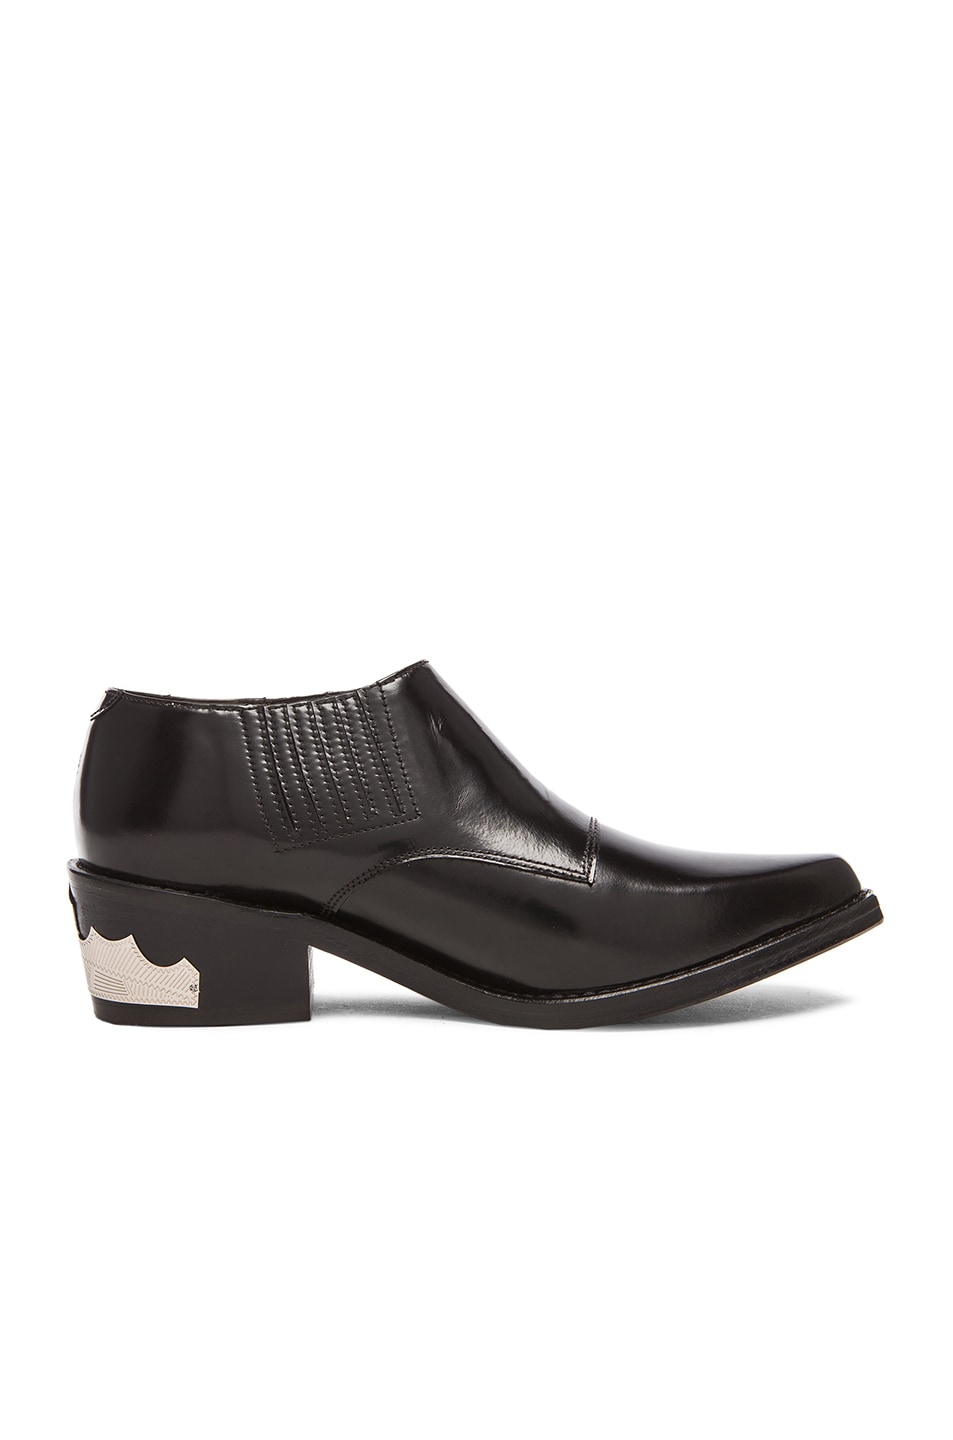 Image 1 of TOGA PULLA Buckled Leather Ankle Booties in Black